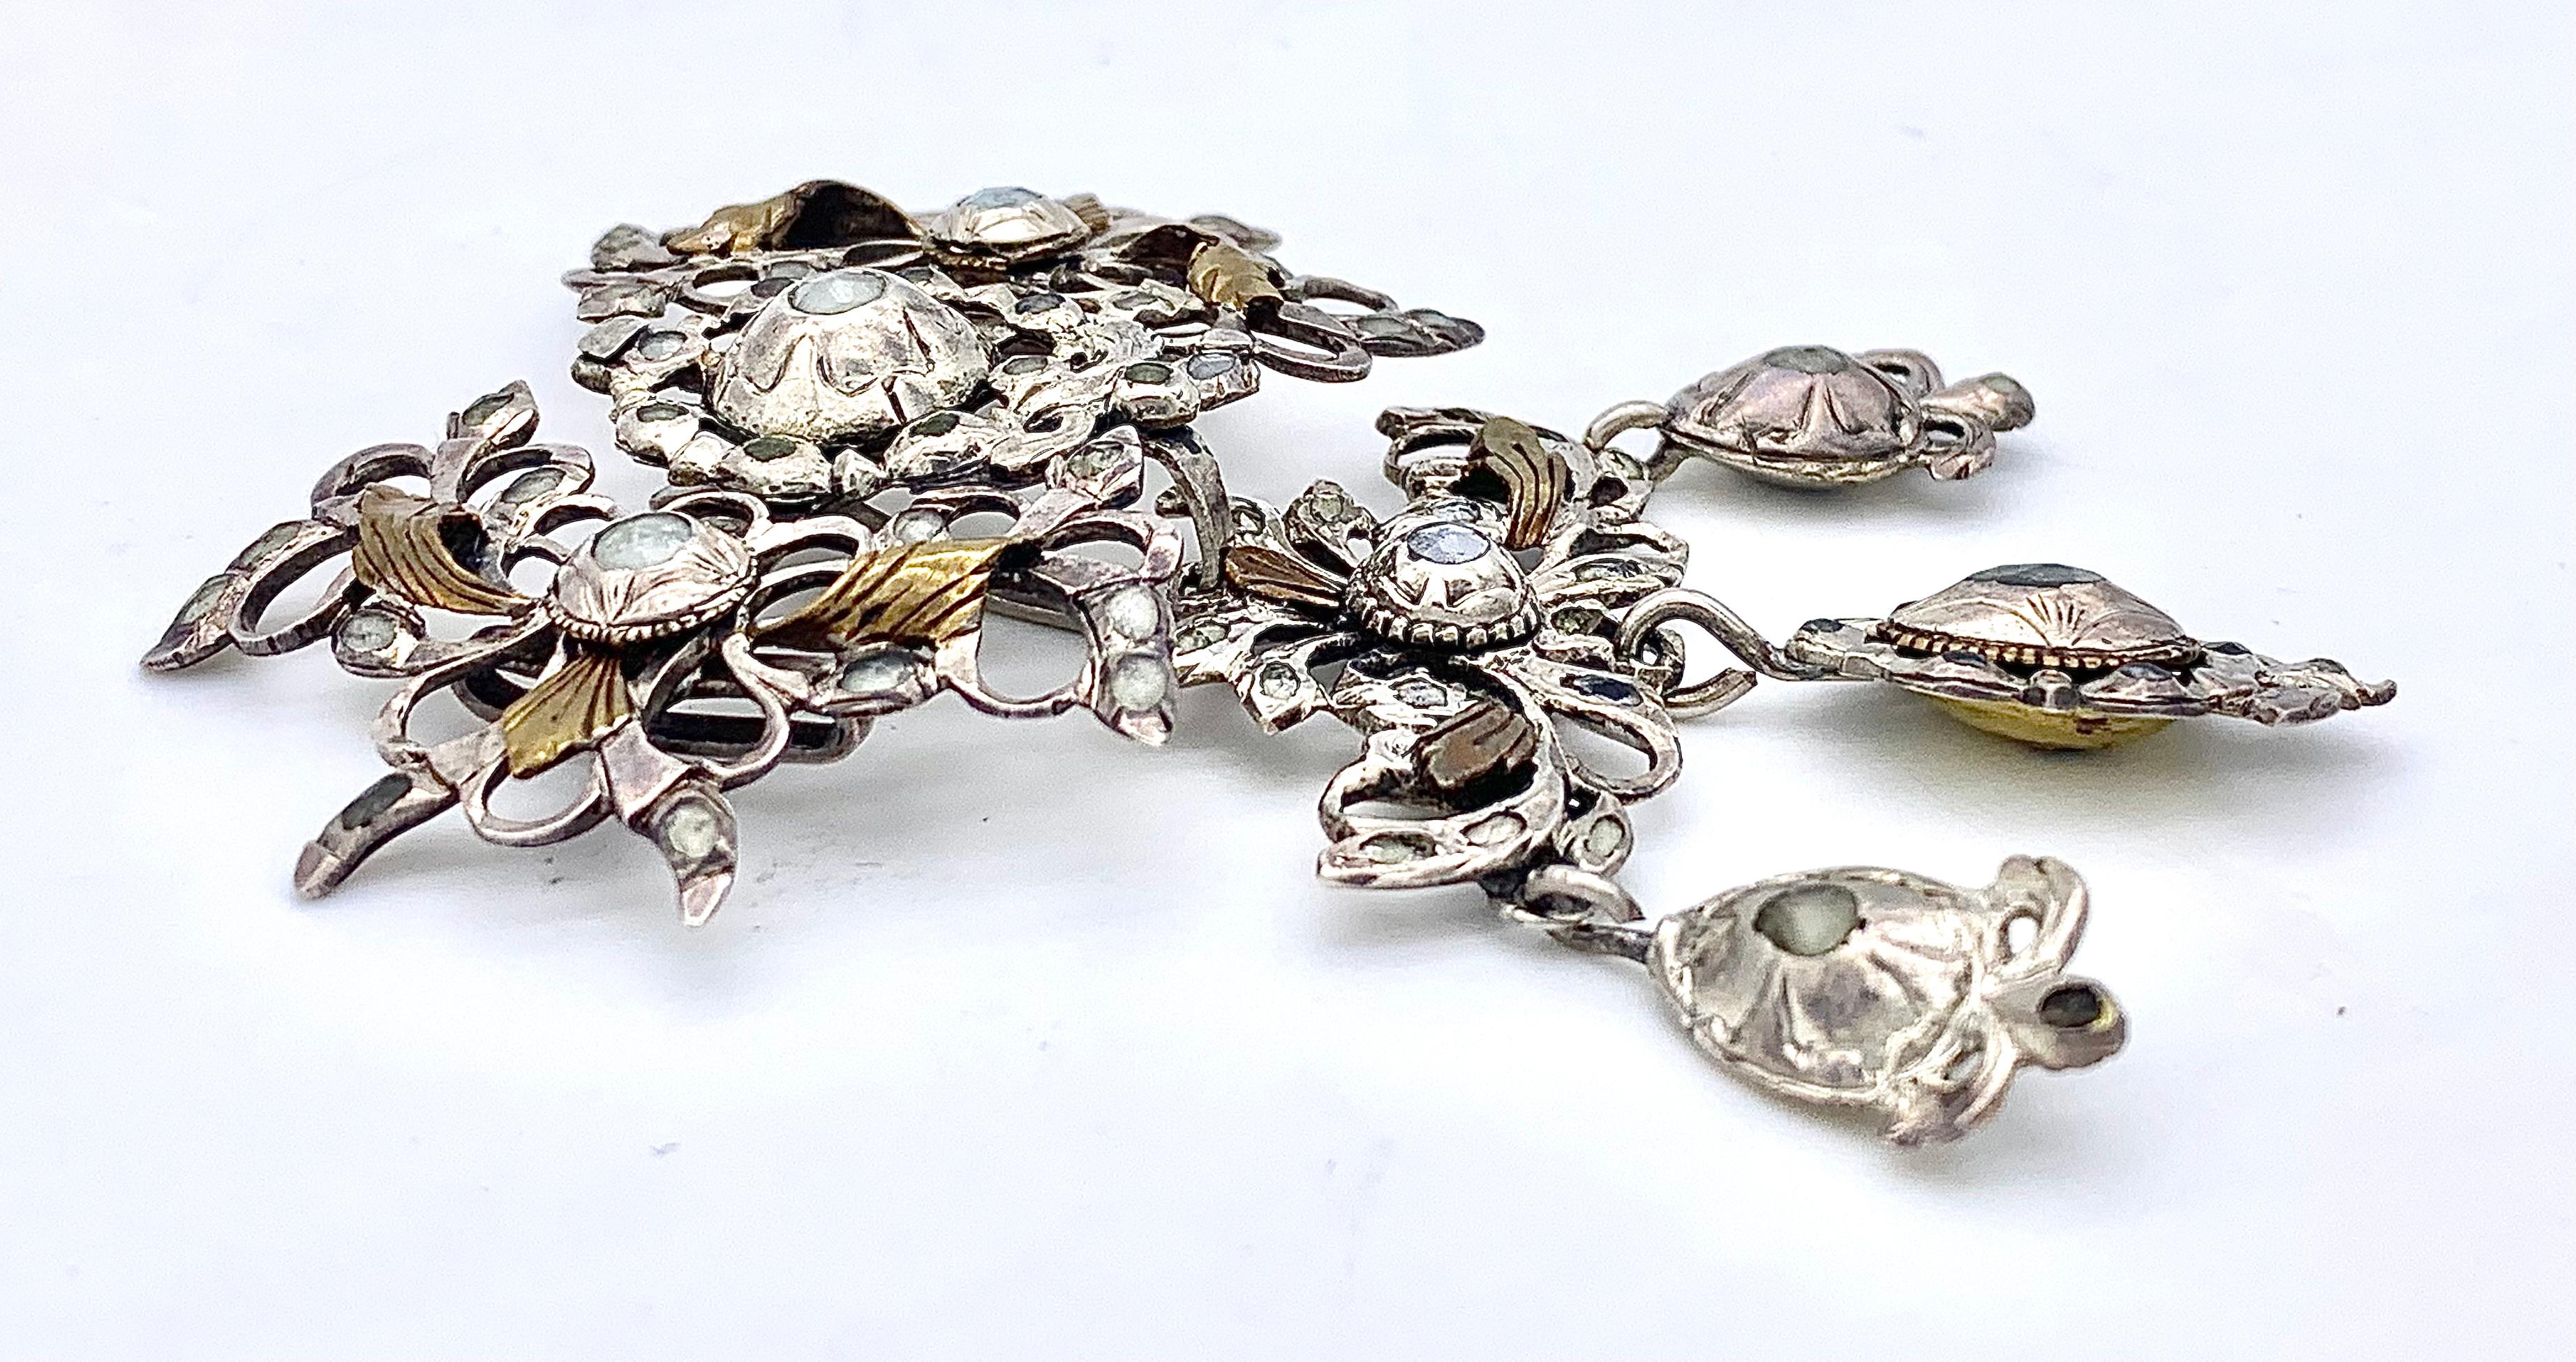 This fine size silver slide pendant shows a pierced design with flower buds, ribbons, bows and gilt leaves. It is decorated with paste stones in closed settings.The largest closed setting in the centre of the slide has a raised flower motif. The